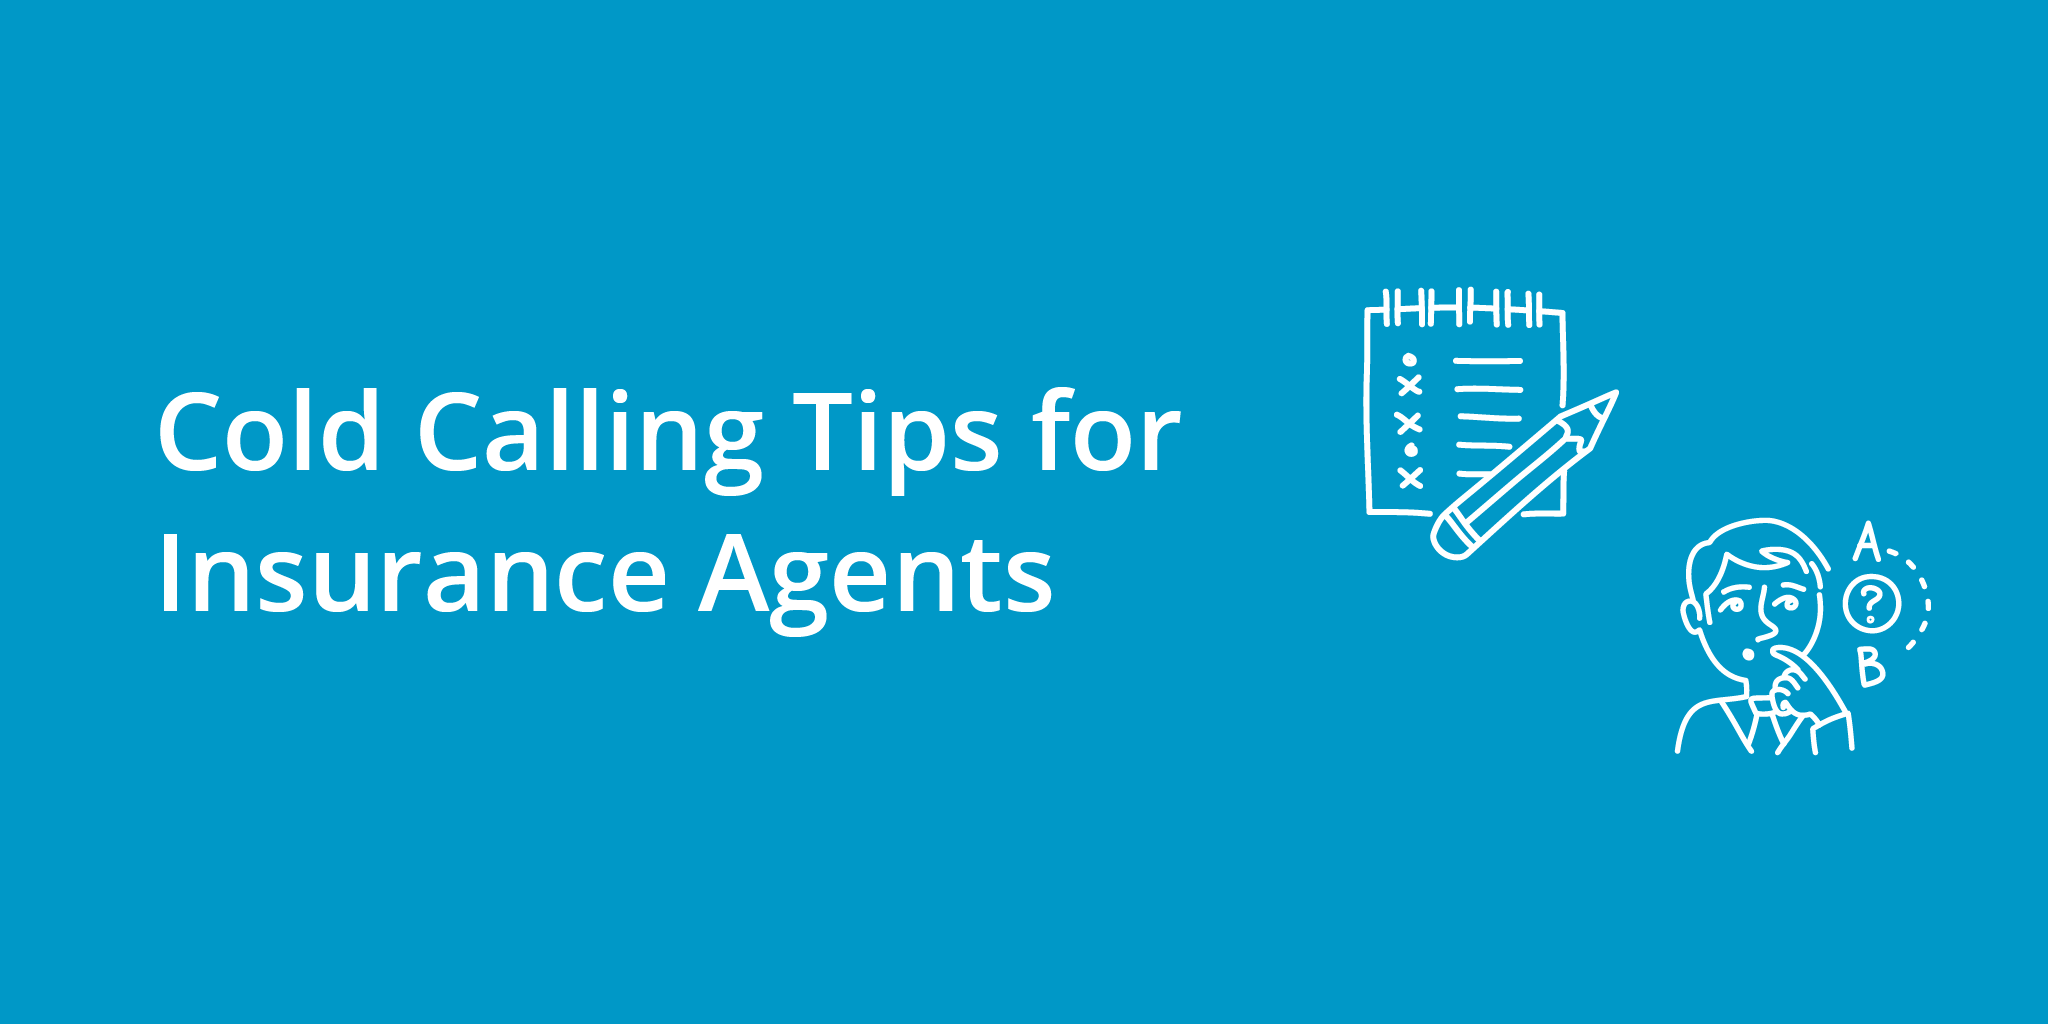 Cold Calling Tips for Insurance Agents